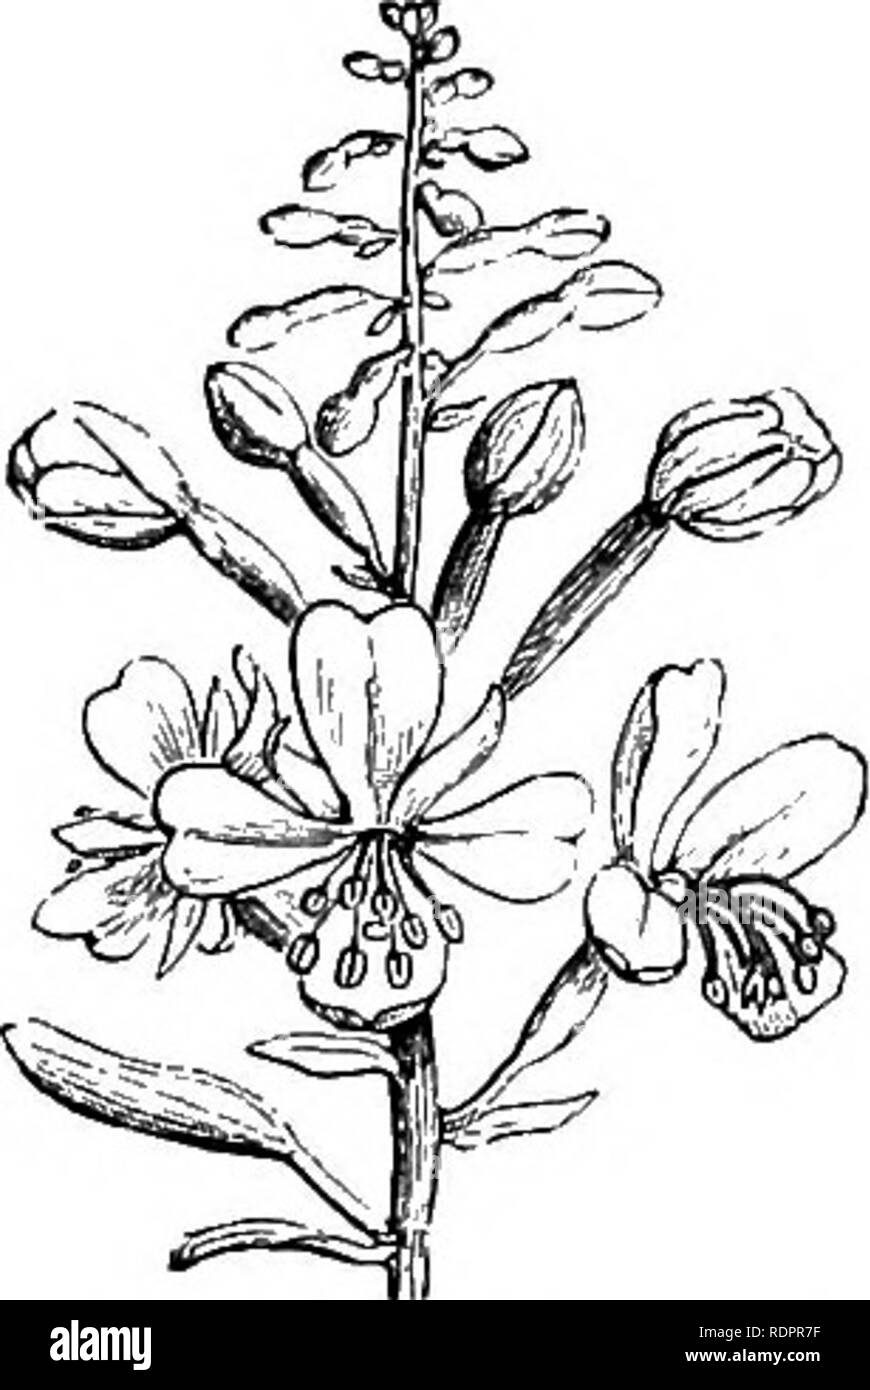 . Notes on the life history of British flowering plants. Botany; Plant ecology. &quot; ONAGRACEiE 187 regular. Three have the stigma deeply four-lobed, one, E. hirsutum, with clasping leaves, while the other two may be distinguished by the form of the leaves, which in one, E. montanum, are ovate or ovate-lanceolate, in the other, E. parviflorum, are lanceolate. The flowers also are small. Of the five species with a club-shaped stigma, two have the stem marked with two or four raised lines; E. tetragonum has sessile leaves, while in E. roseum they are shortly stalked. Of the three species with  Stock Photo